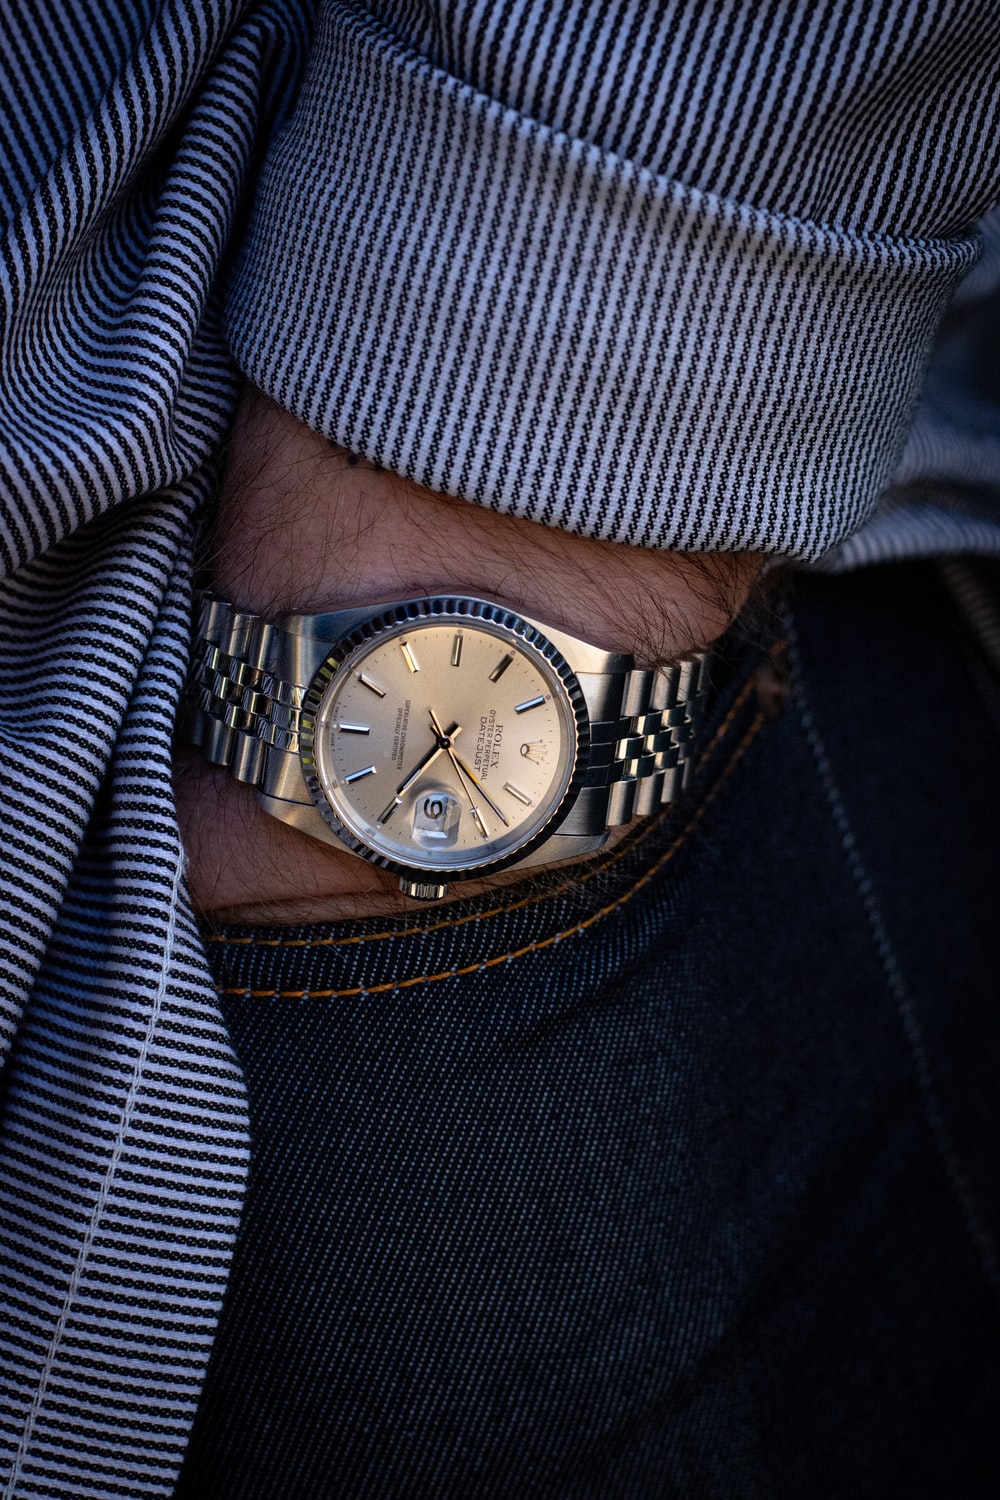 Rolex Picture [HD]. Download Free Image